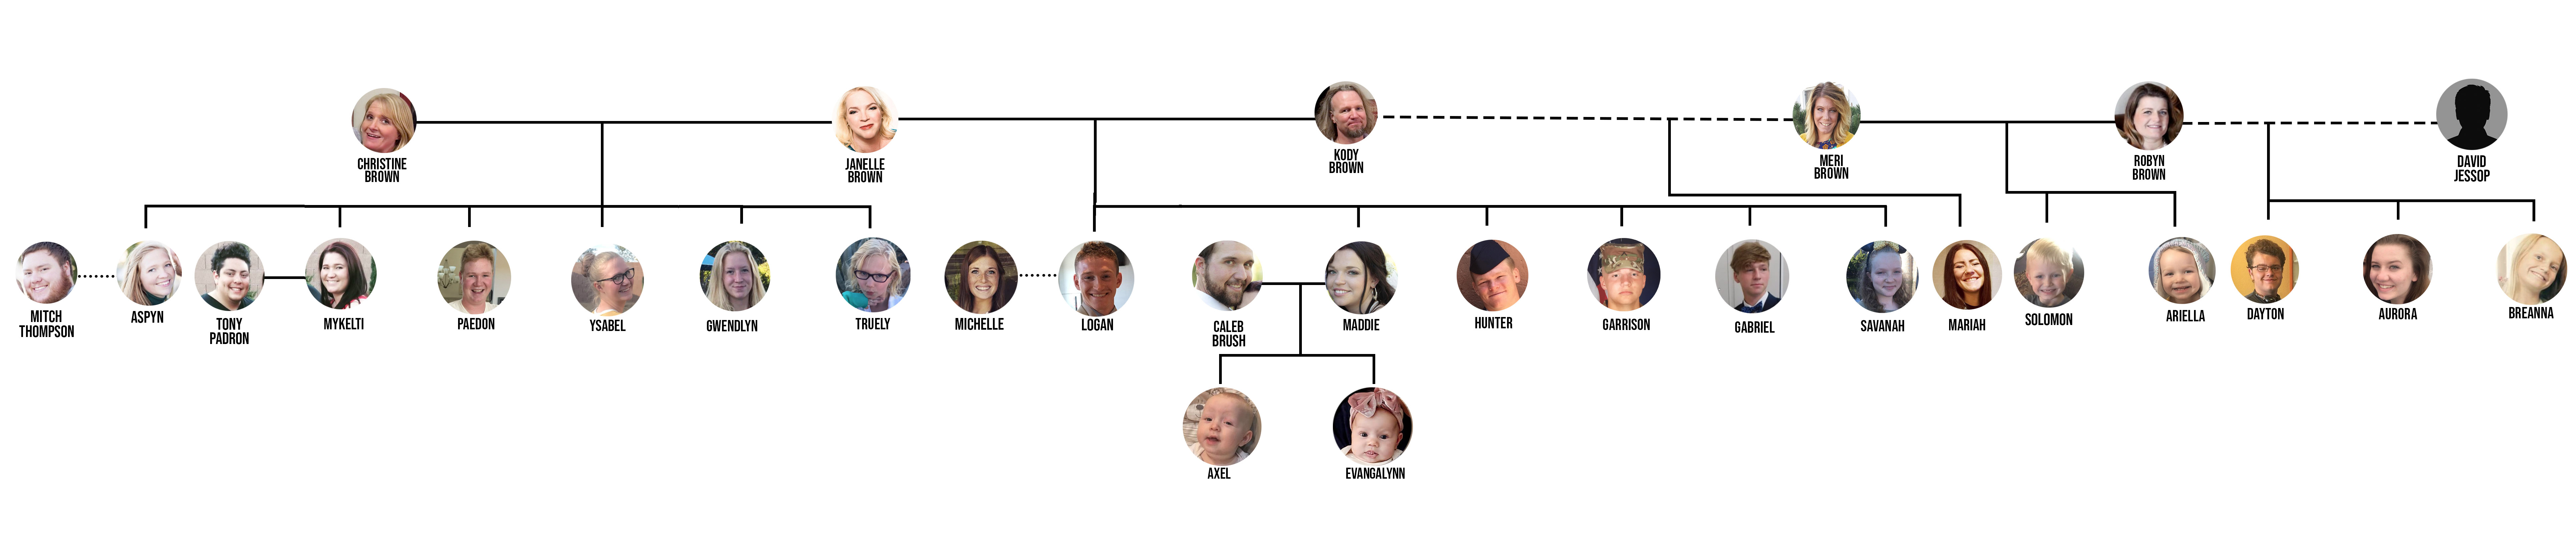 'Sister Wives' Family Tree All About the 4 Wives and 18 Children